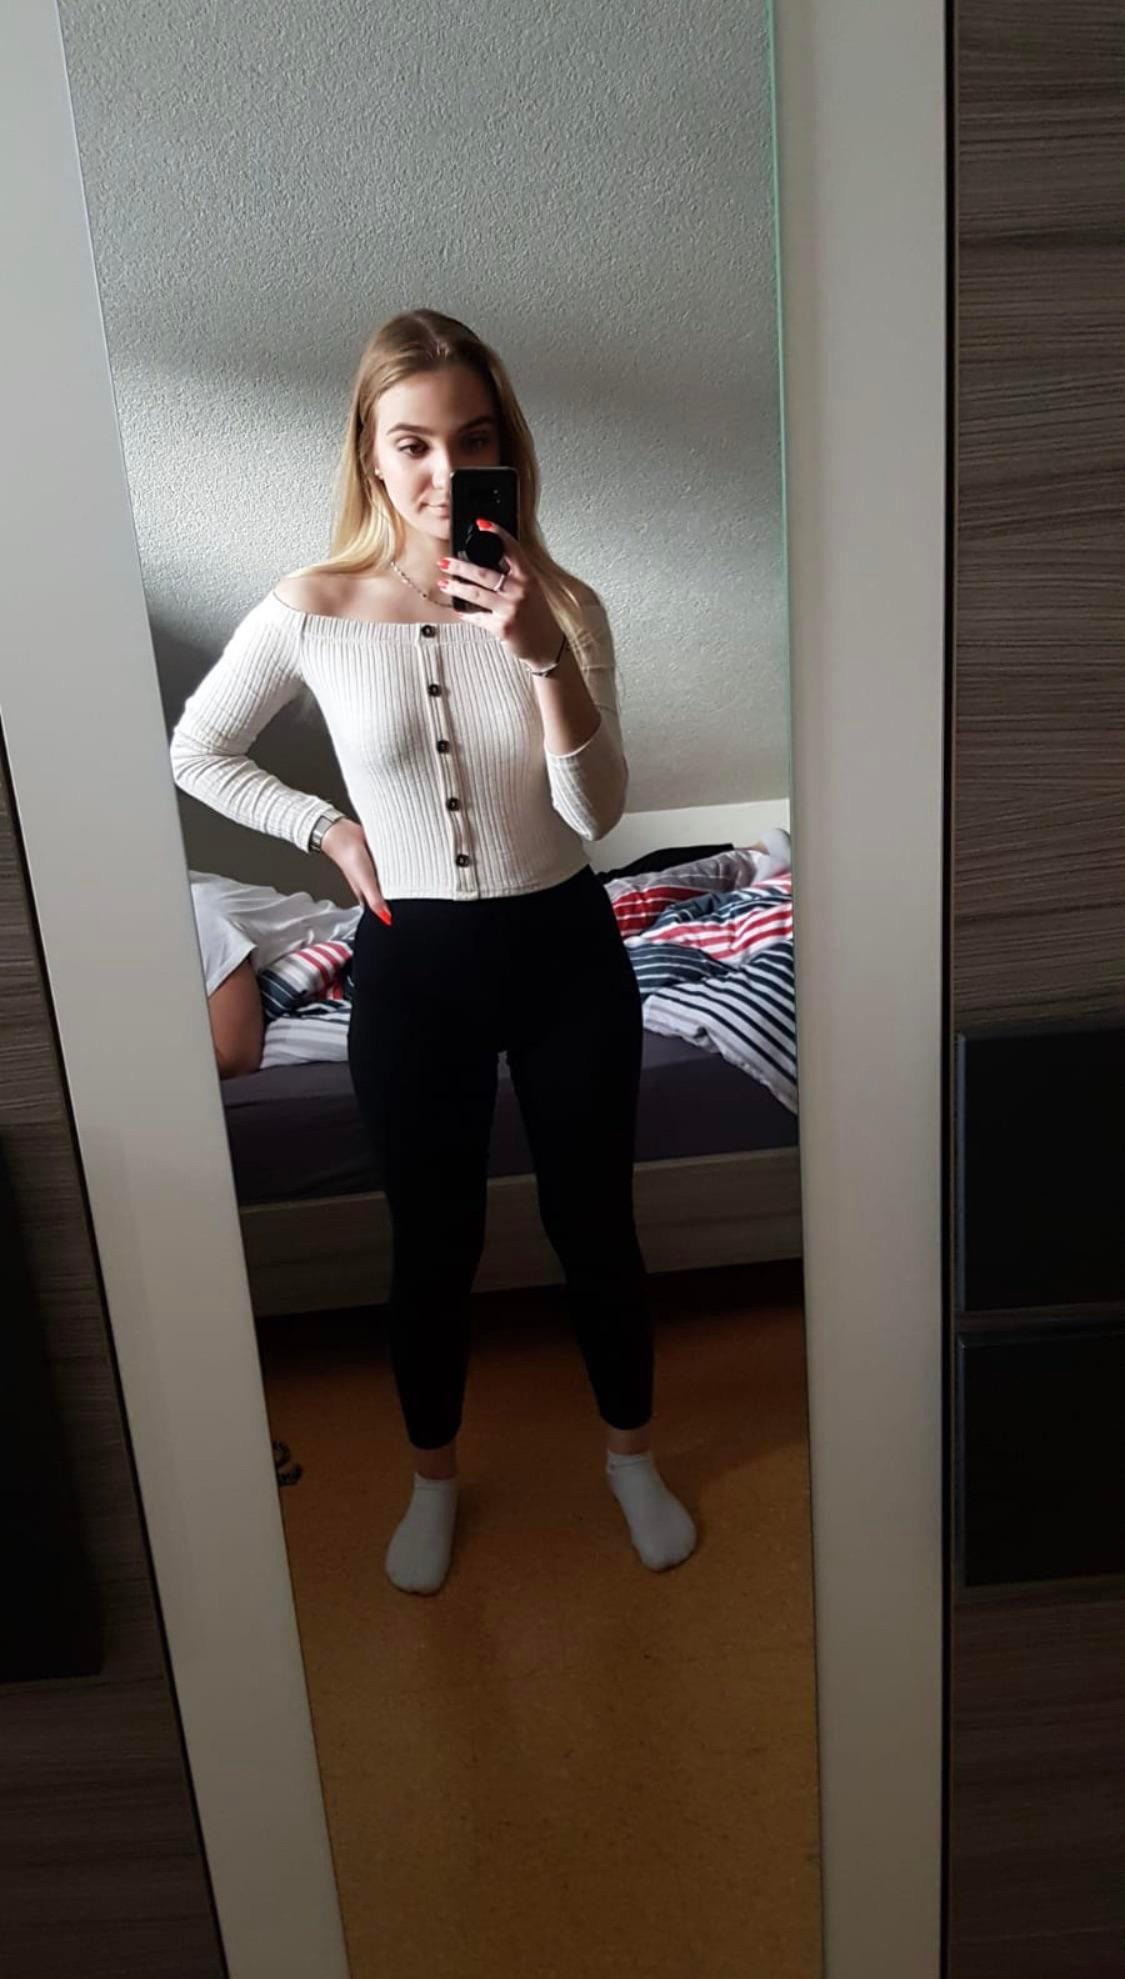 My friend is looking super sexy! What would you do to her | Scrolller